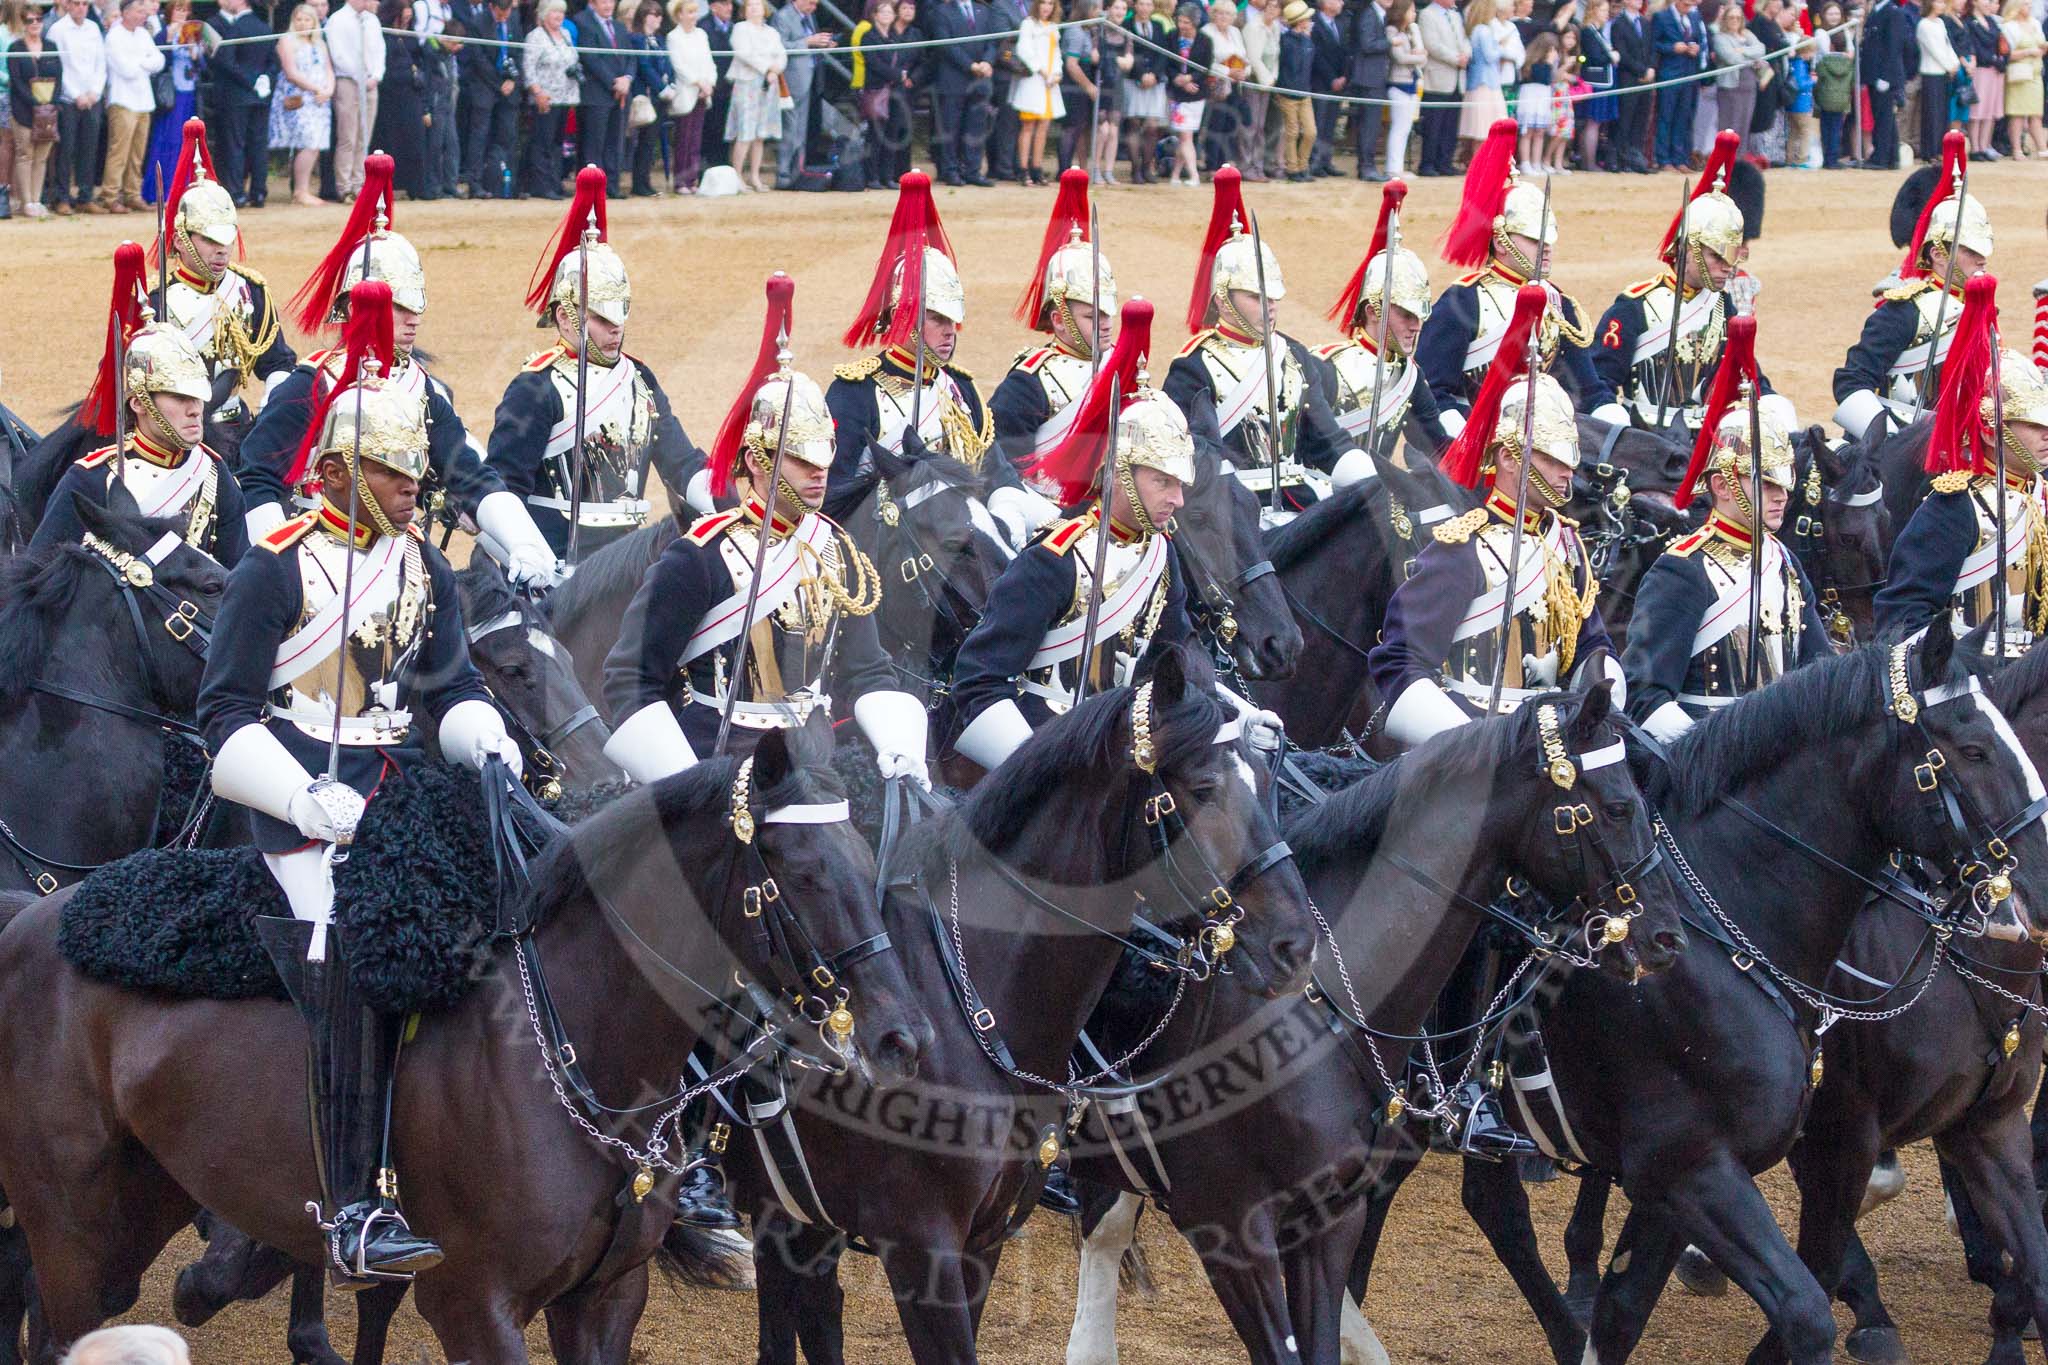 Trooping the Colour 2015. Image #607, 13 June 2015 11:58 Horse Guards Parade, London, UK